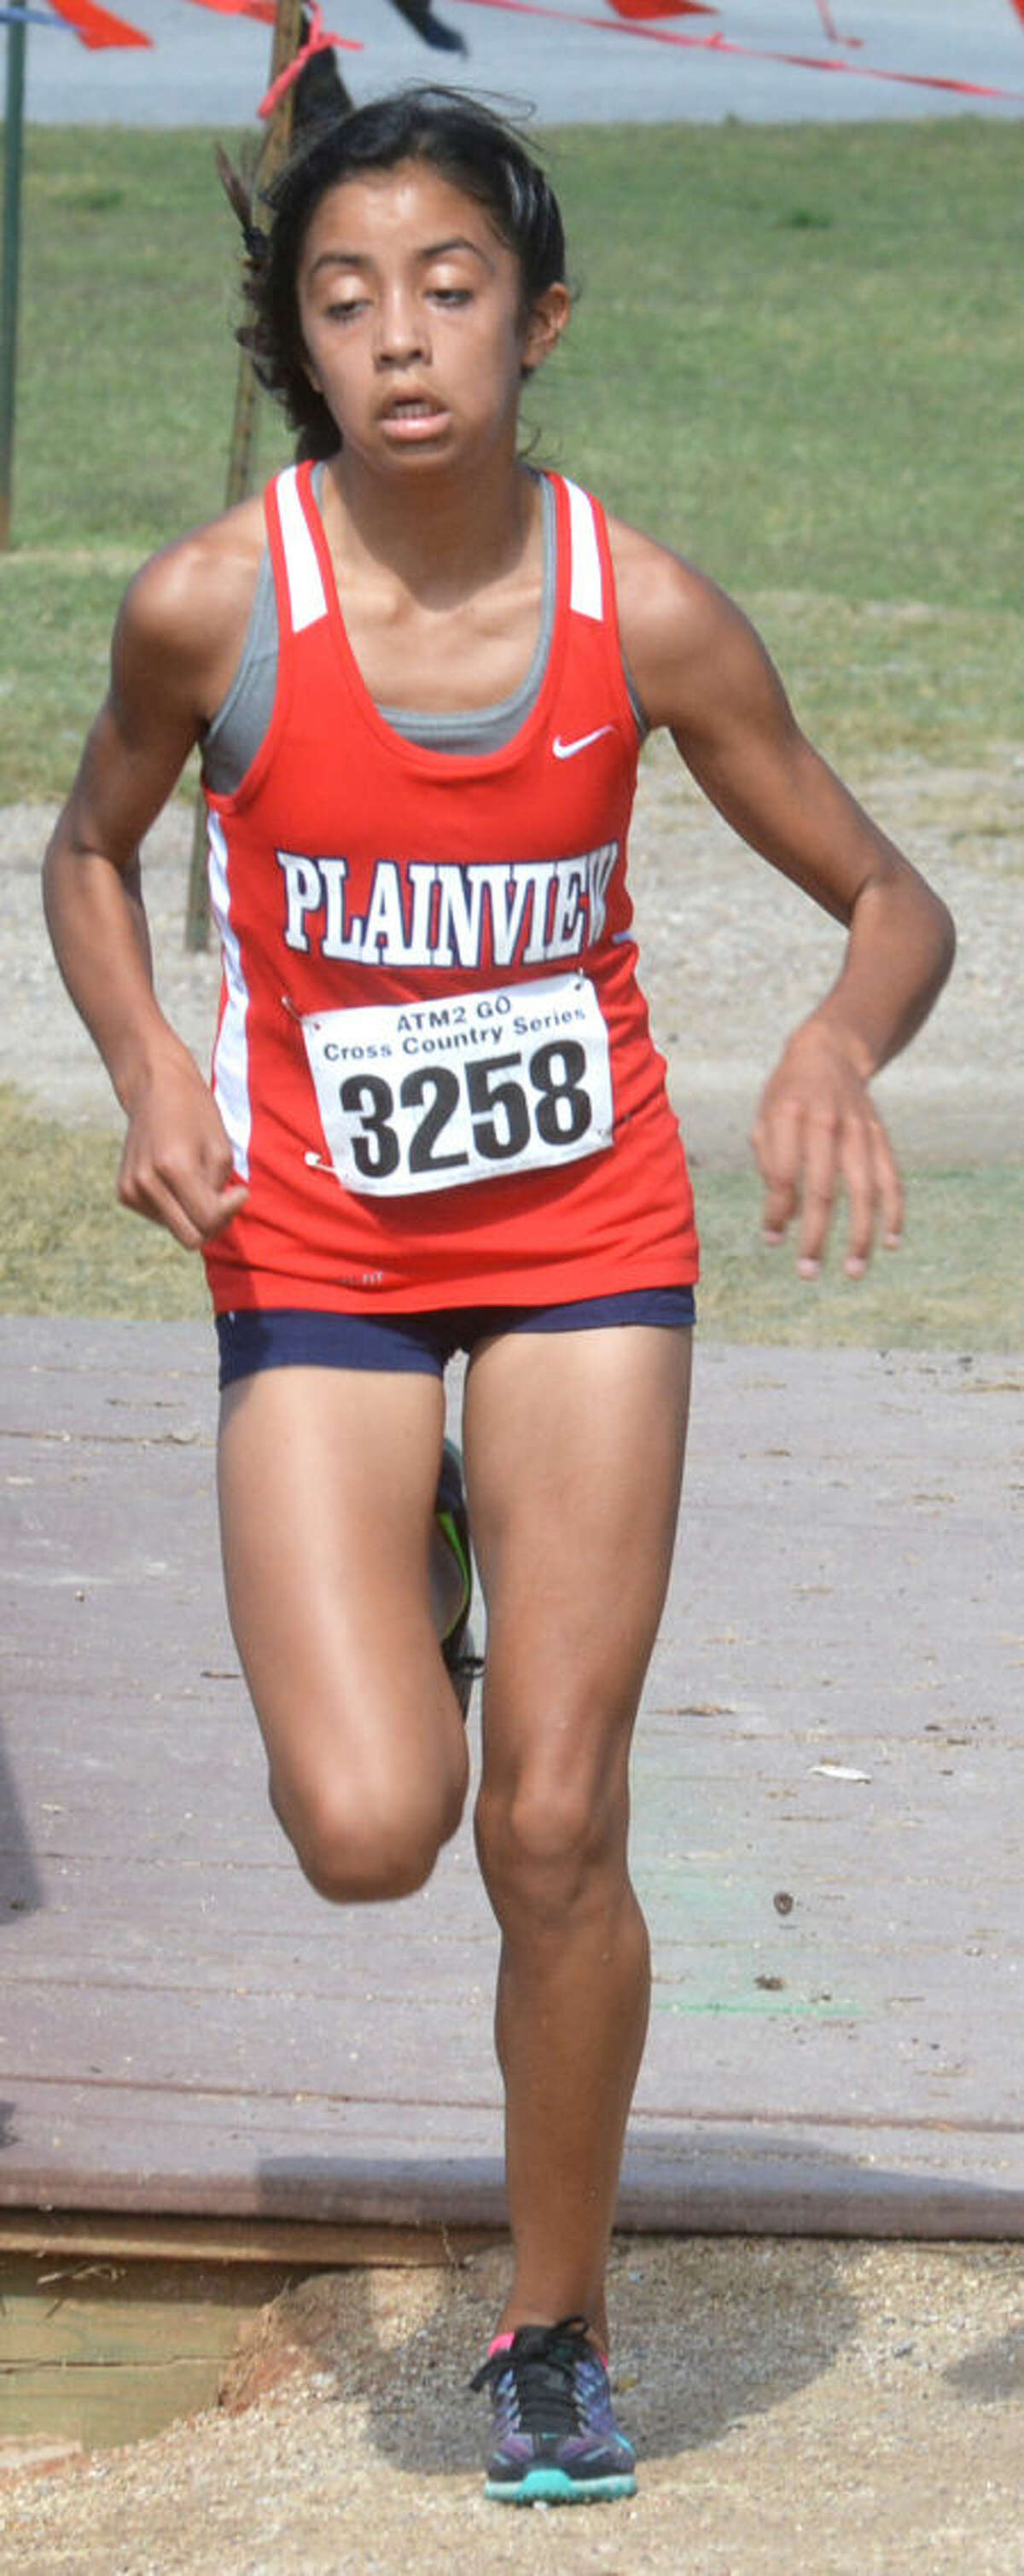 Plainview freshman Kristan Rincon will compete at the UIL state cross country meet at Old Settlers Park in Round Rock Saturday. The girls Class 5A race is scheduled to start at 11:30 a.m.